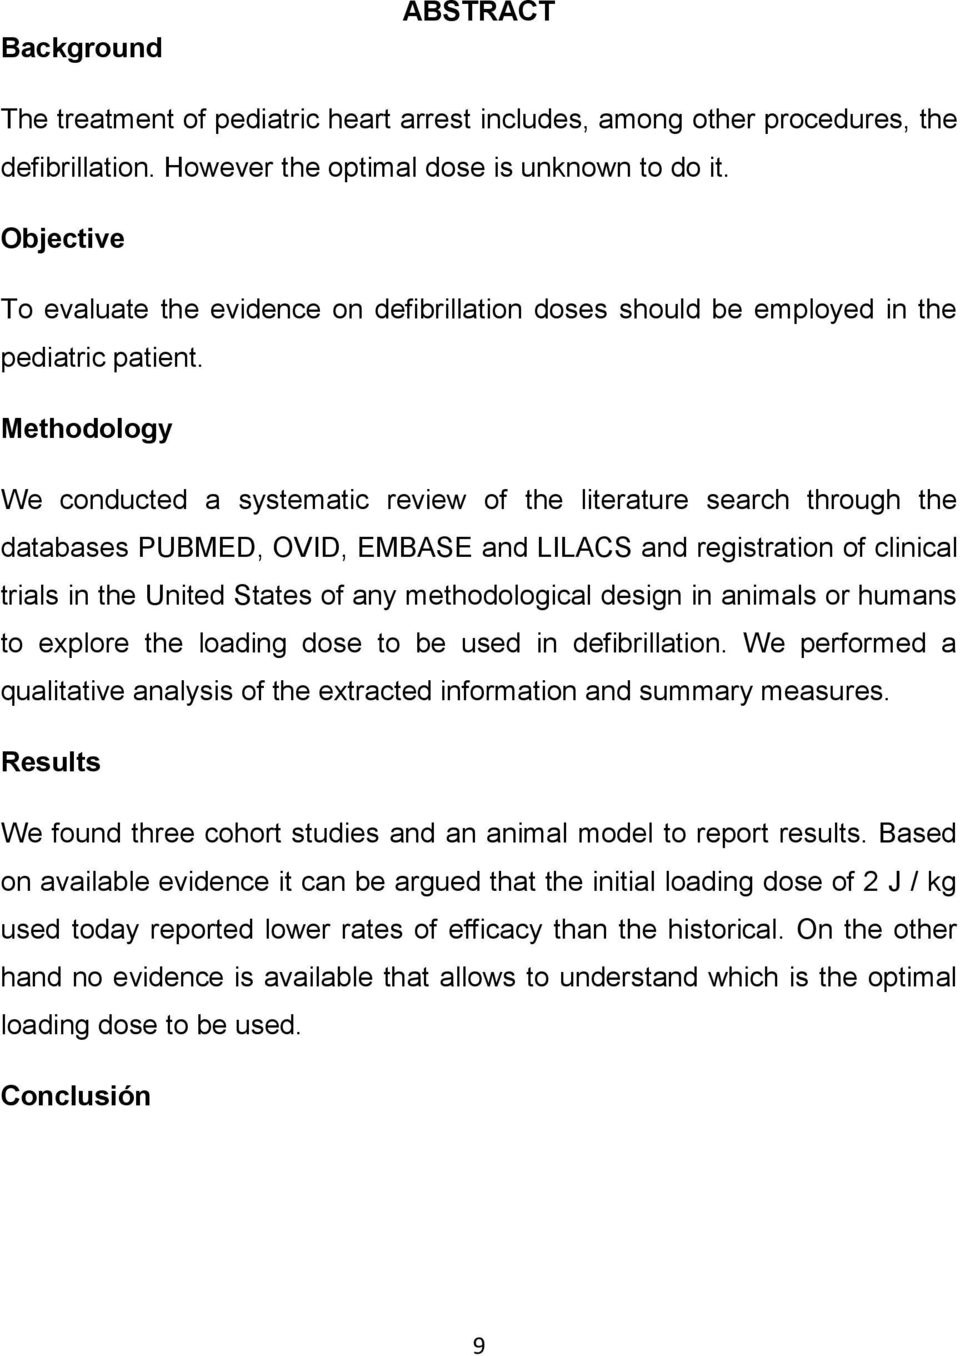 Methodology We conducted a systematic review of the literature search through the databases PUBMED, OVID, EMBASE and LILACS and registration of clinical trials in the United States of any